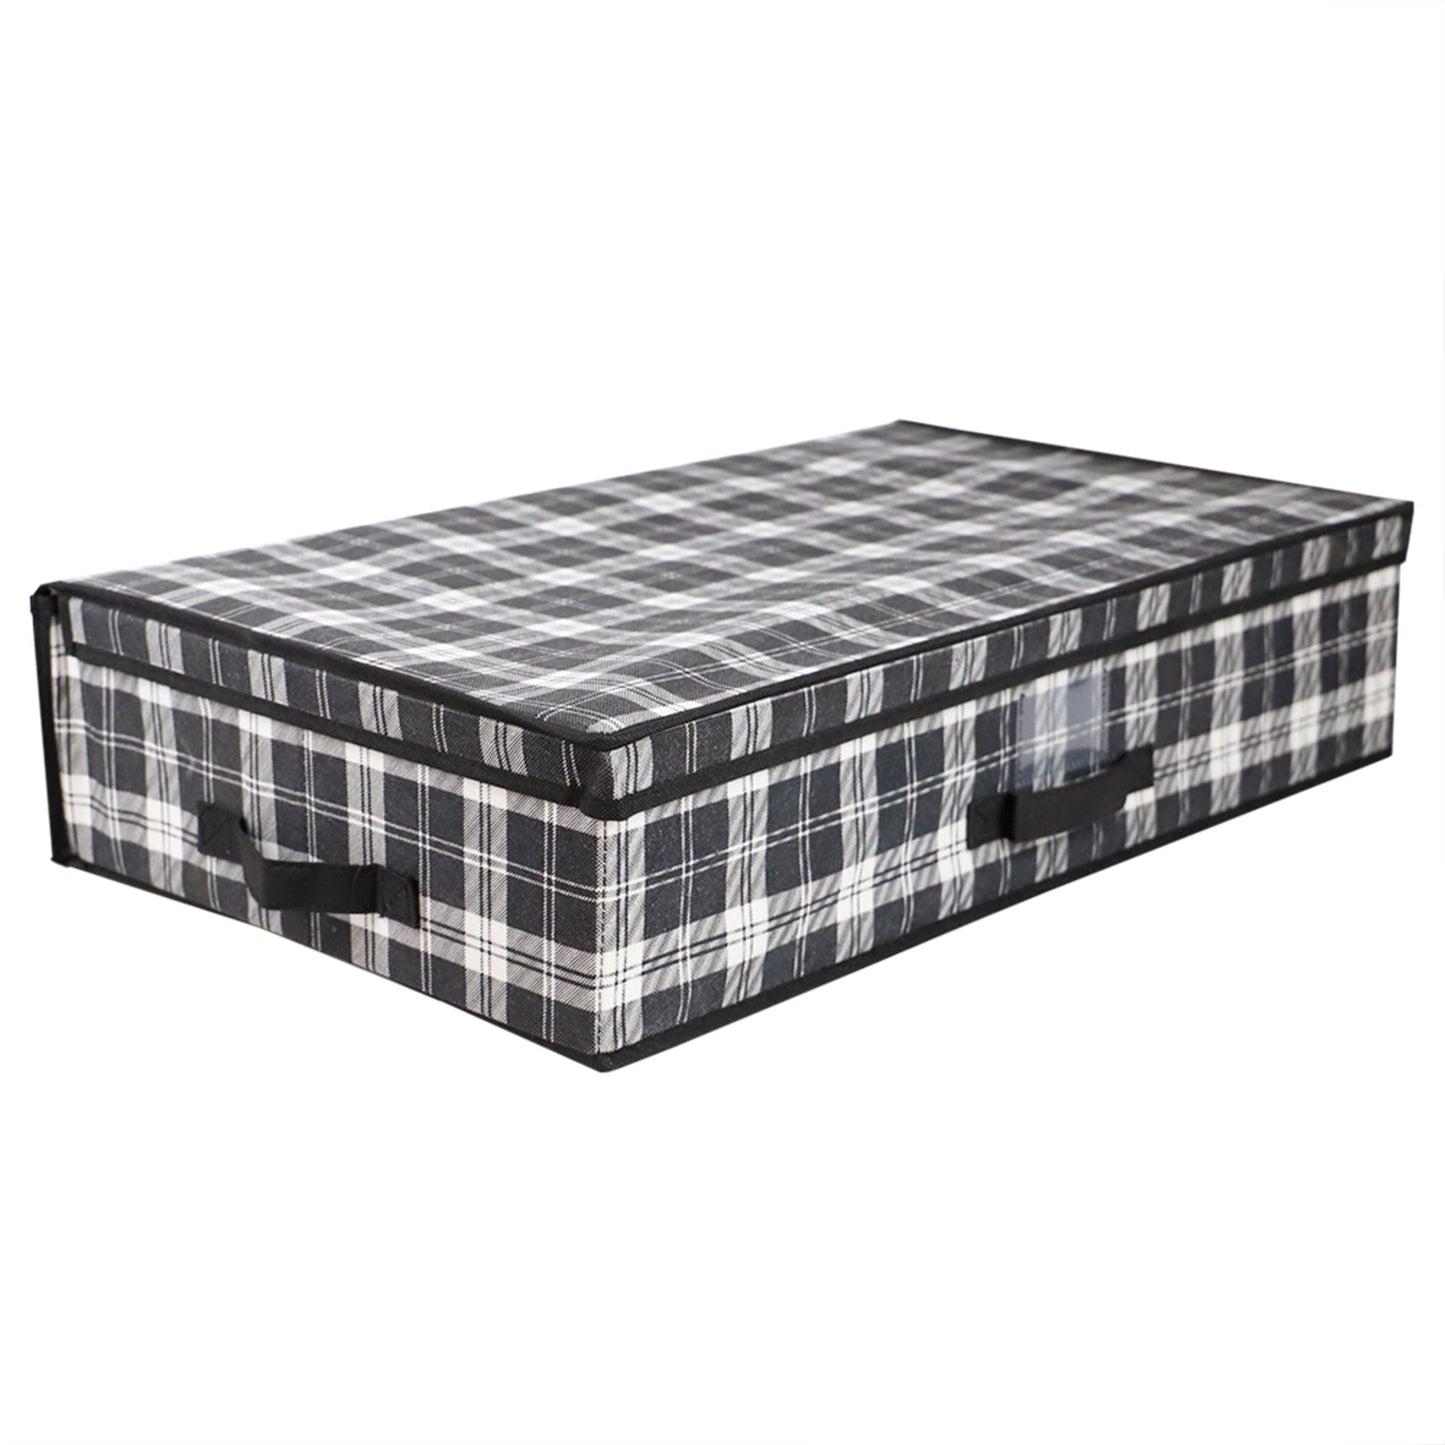 Plaid Non-Woven Under the Bed Storage Box with Label Window, Black